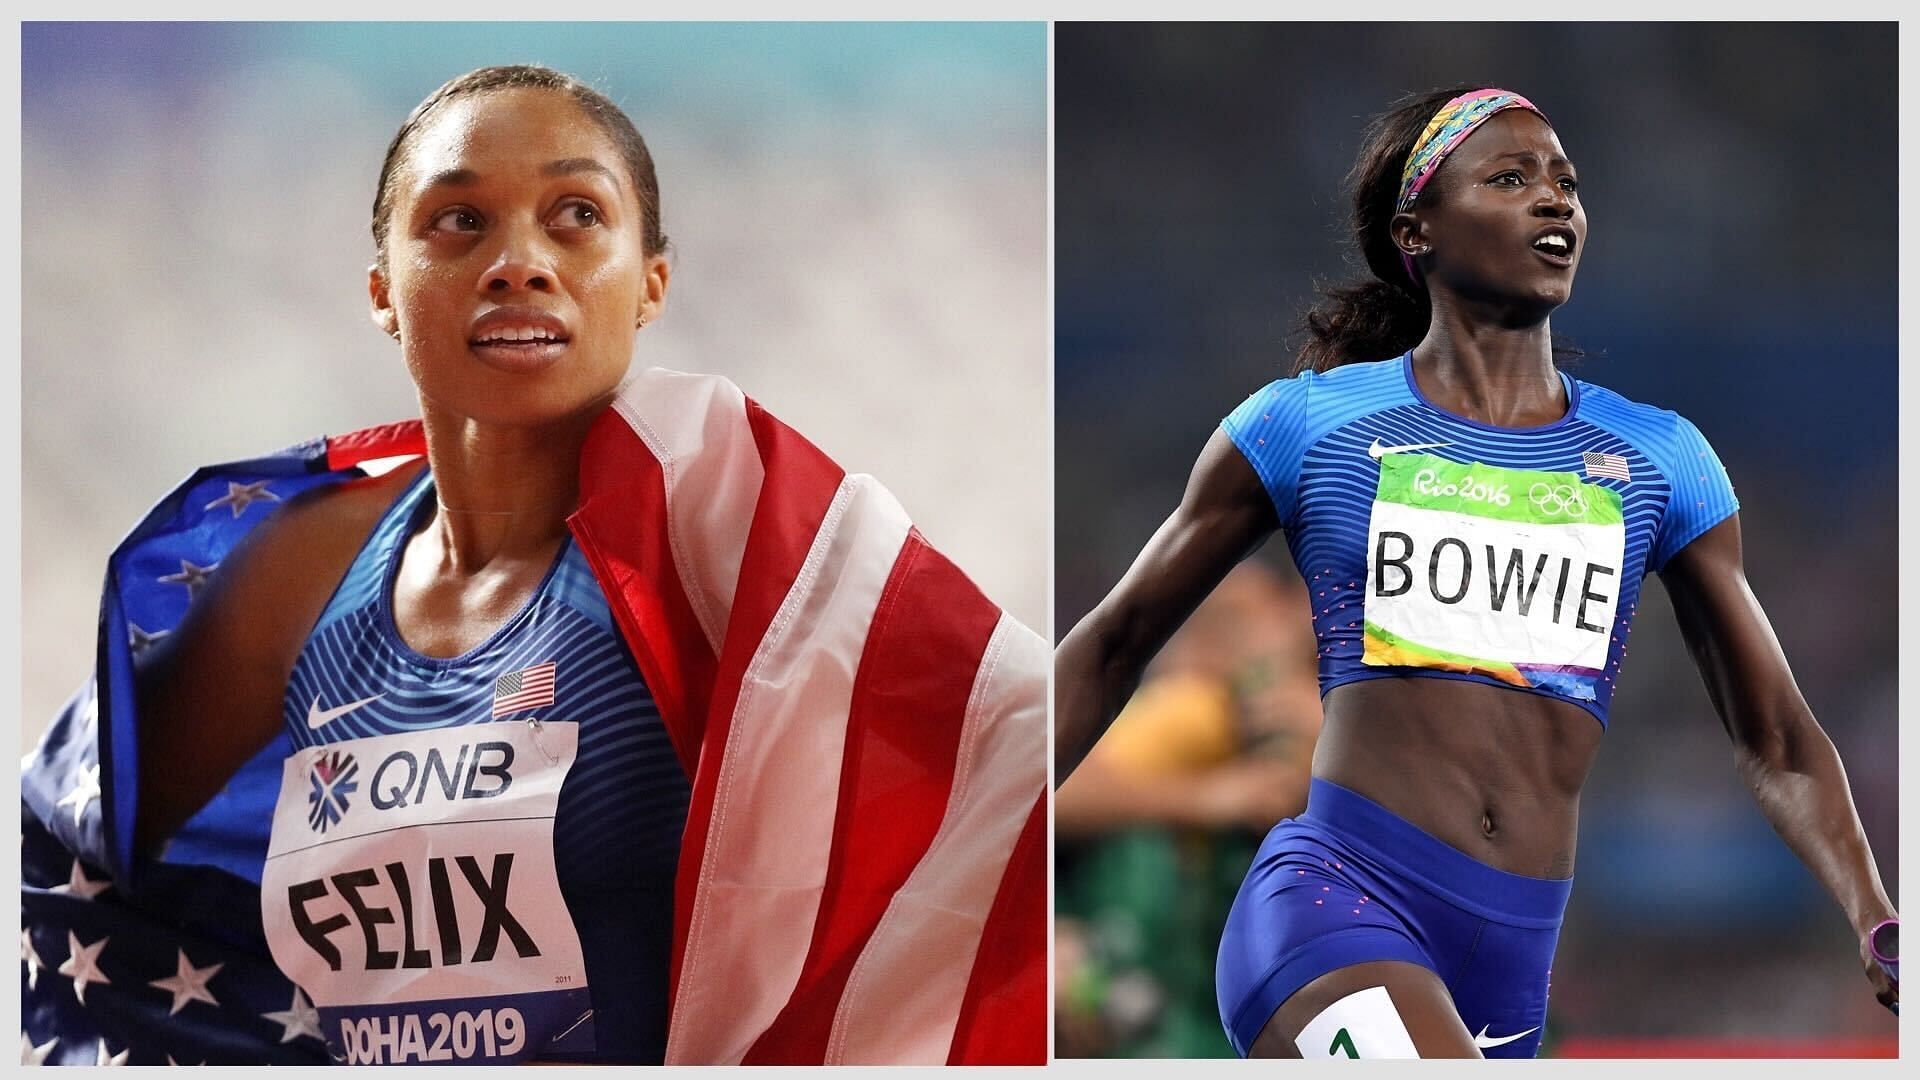 American athletes Allyson Felix and Tori Bowie